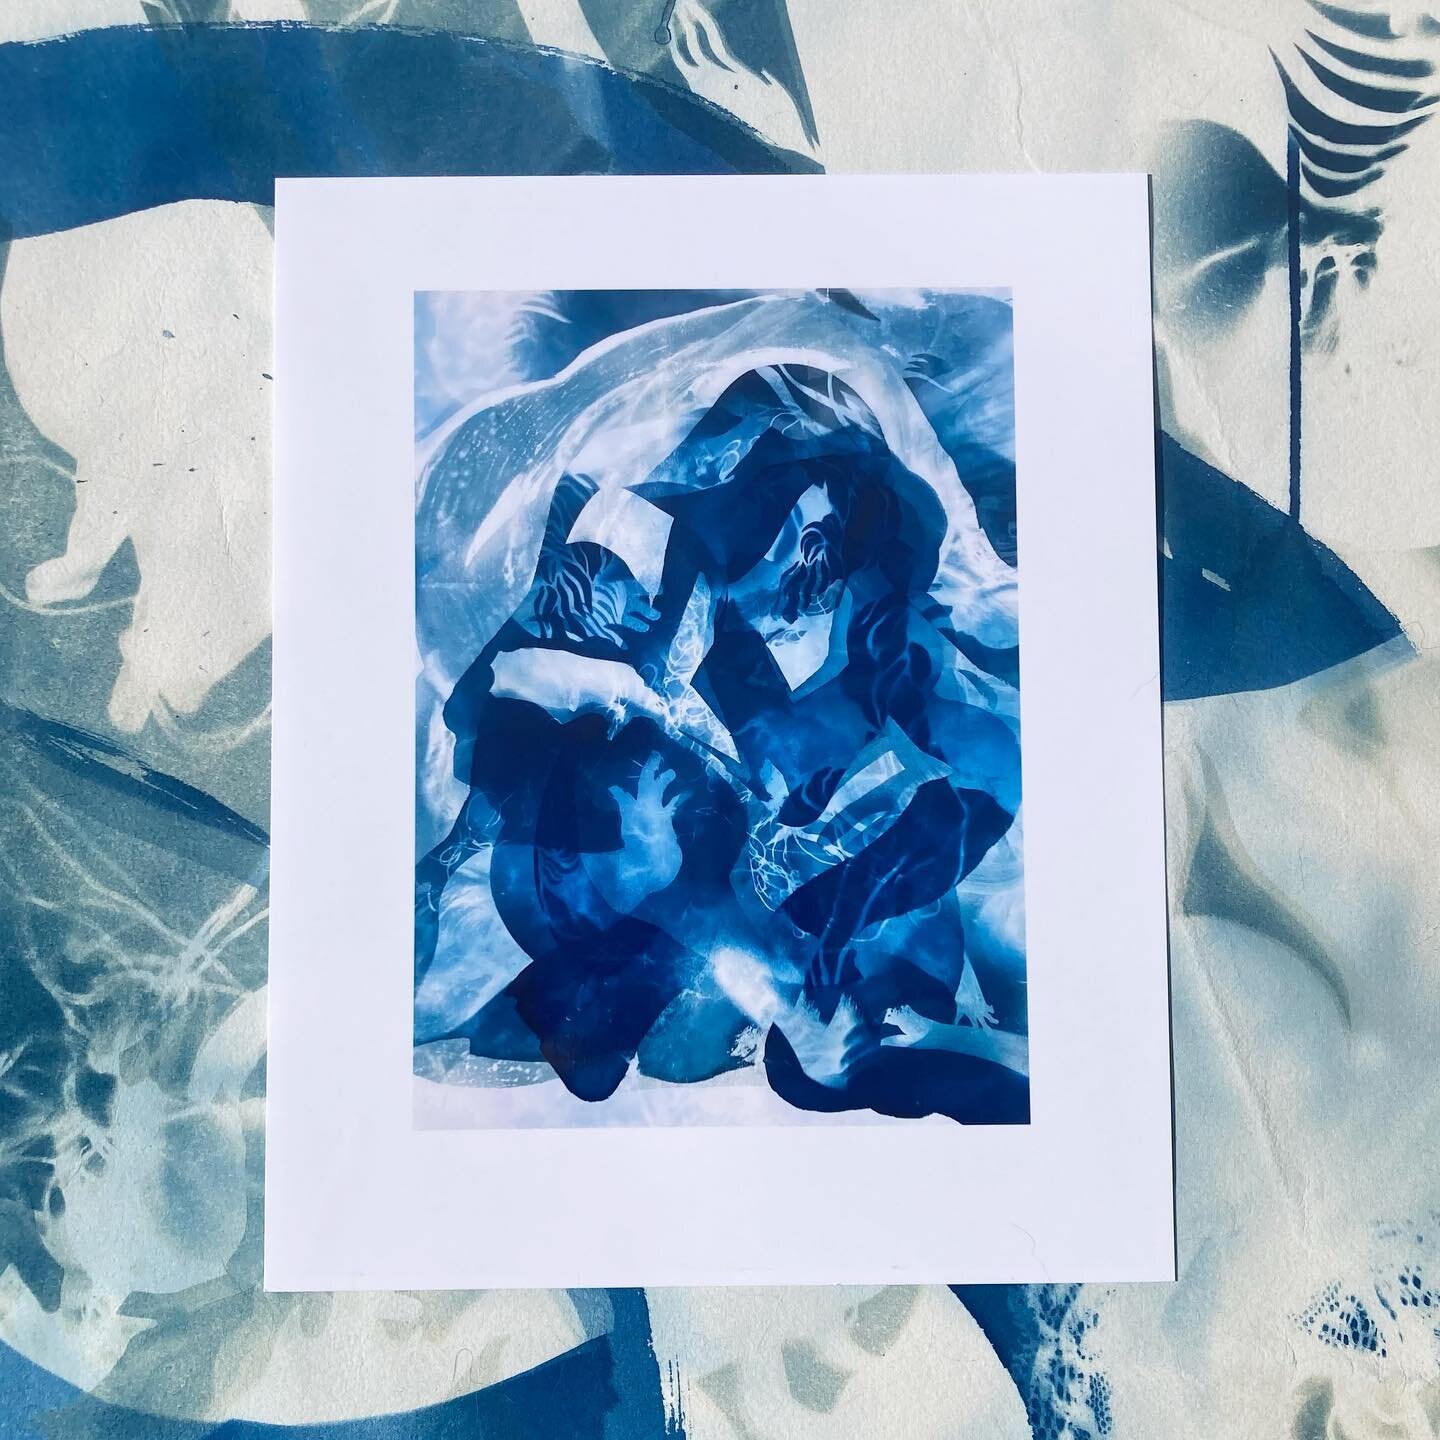 excited to tell you that &lsquo;practicing the shapes of love&rsquo; is now available in my shop as a high-gloss 8x10 inch print in celebration of my show at @catalystashland!

also stay tuned: i am cooking up a cyanotype workshop here in portland! r